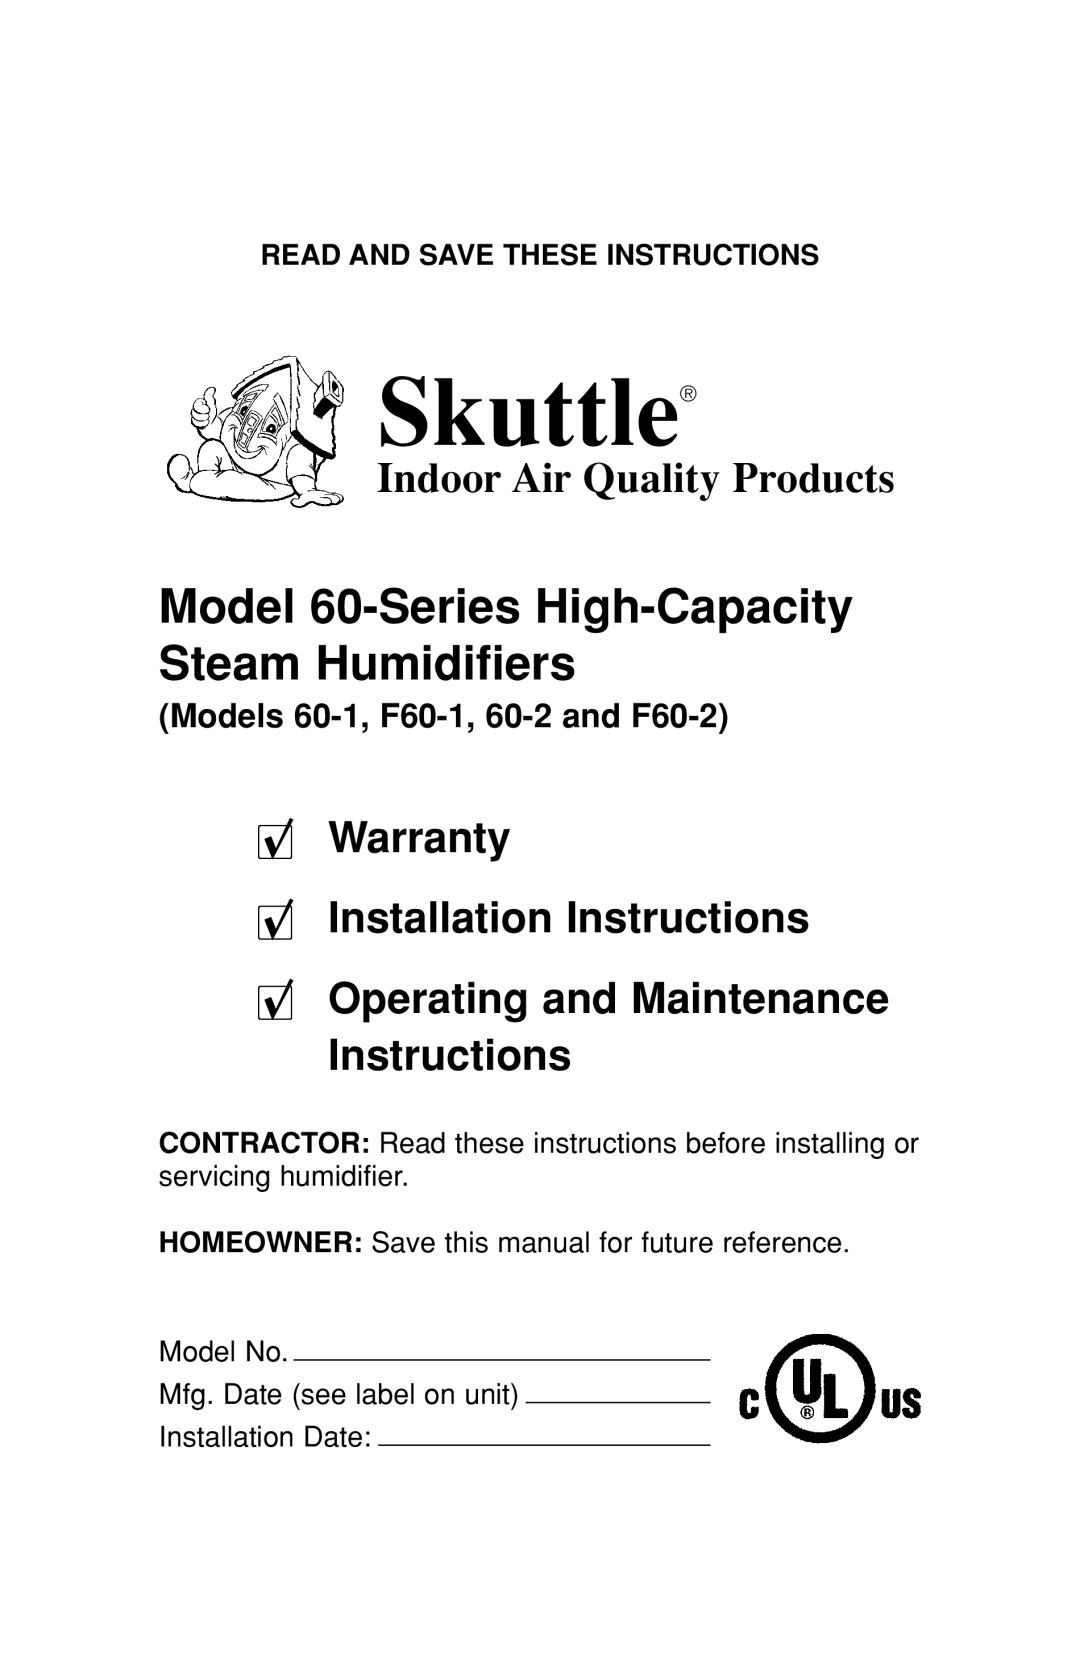 Skuttle Indoor Air Quality Products 60-2 warranty Indoor Air Quality Products, Read And Save These Instructions, Skuttle 